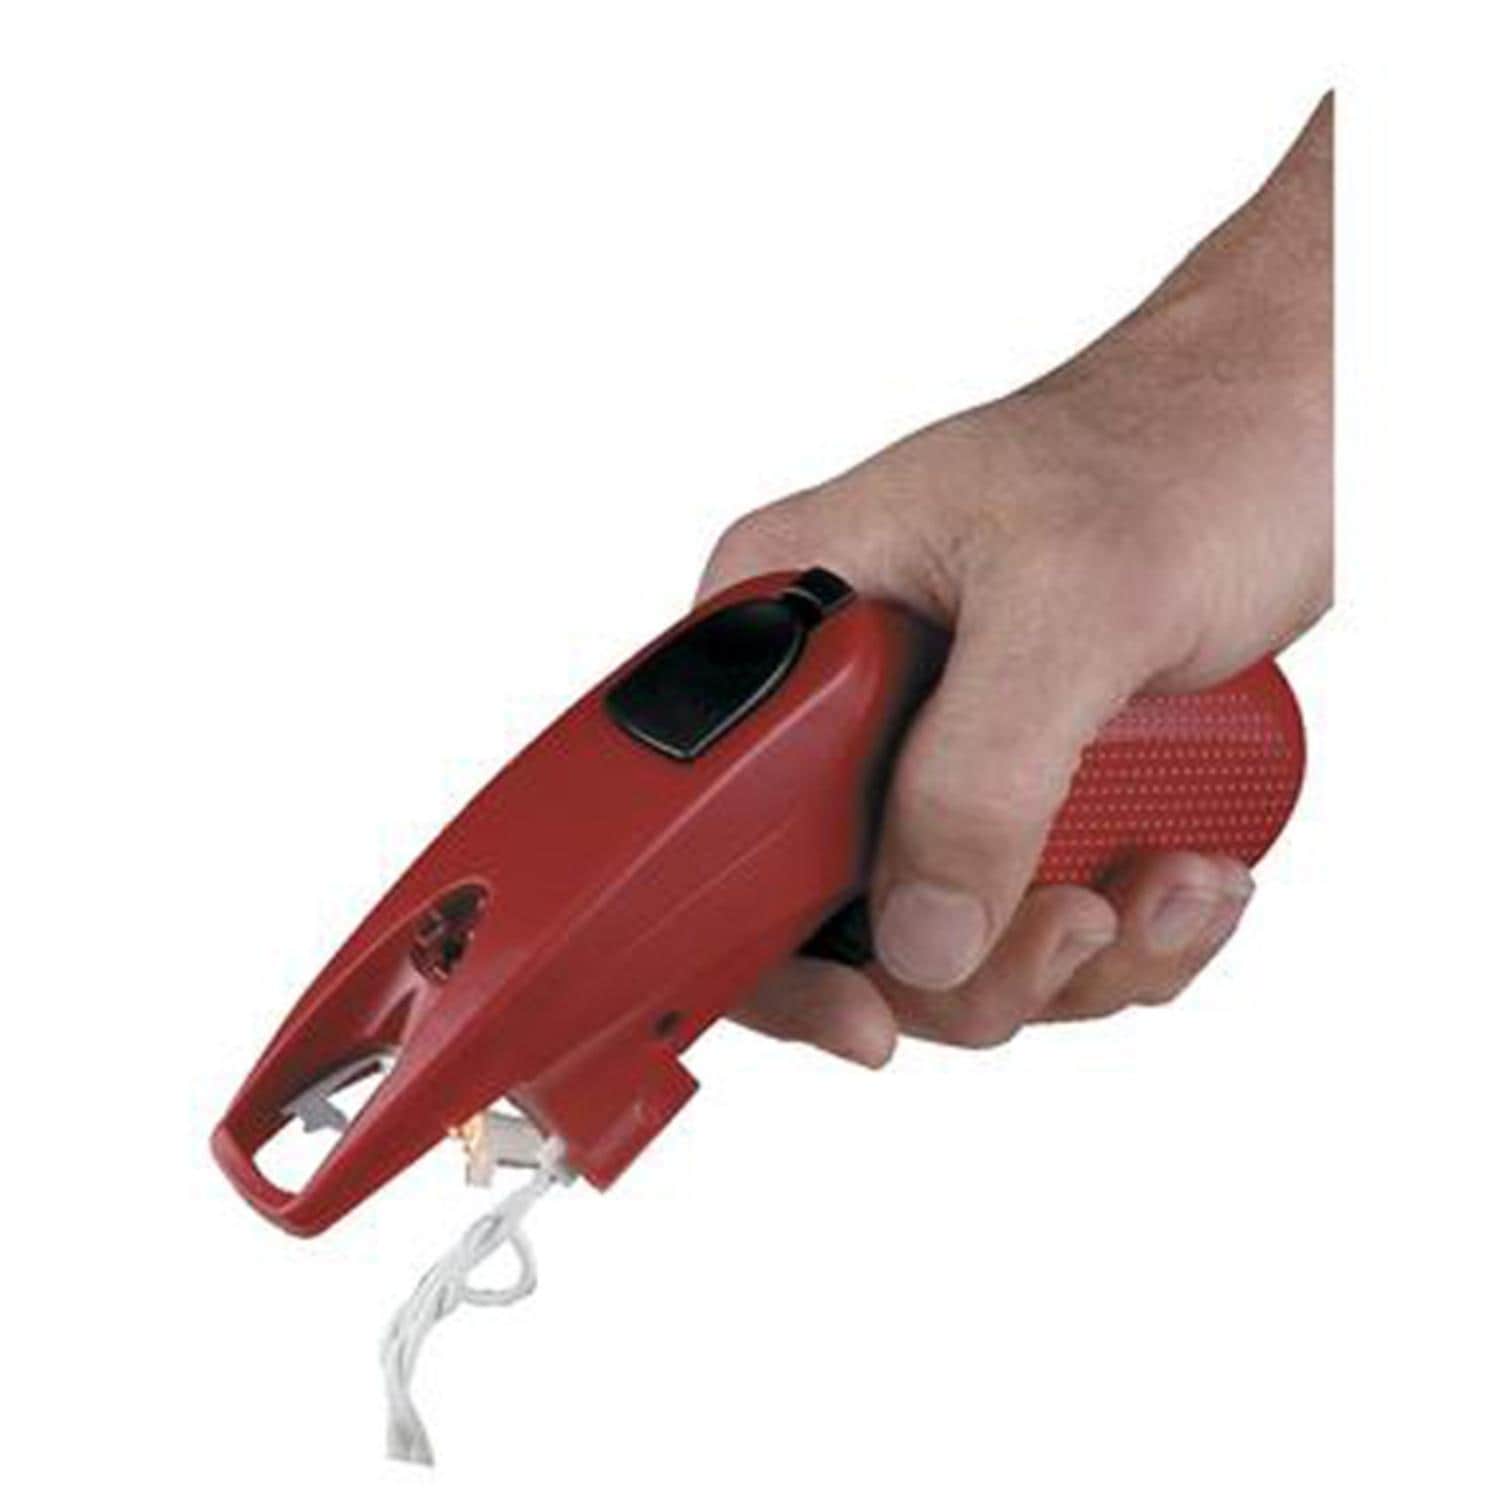 https://ak1.ostkcdn.com/images/products/is/images/direct/181d8223ae3bfa1452b64cc4dd52d55af462bd7a/Light-Keeper-Pro-The-Complete-Tool-For-Fixing-Your-Christmas-Lights.jpg